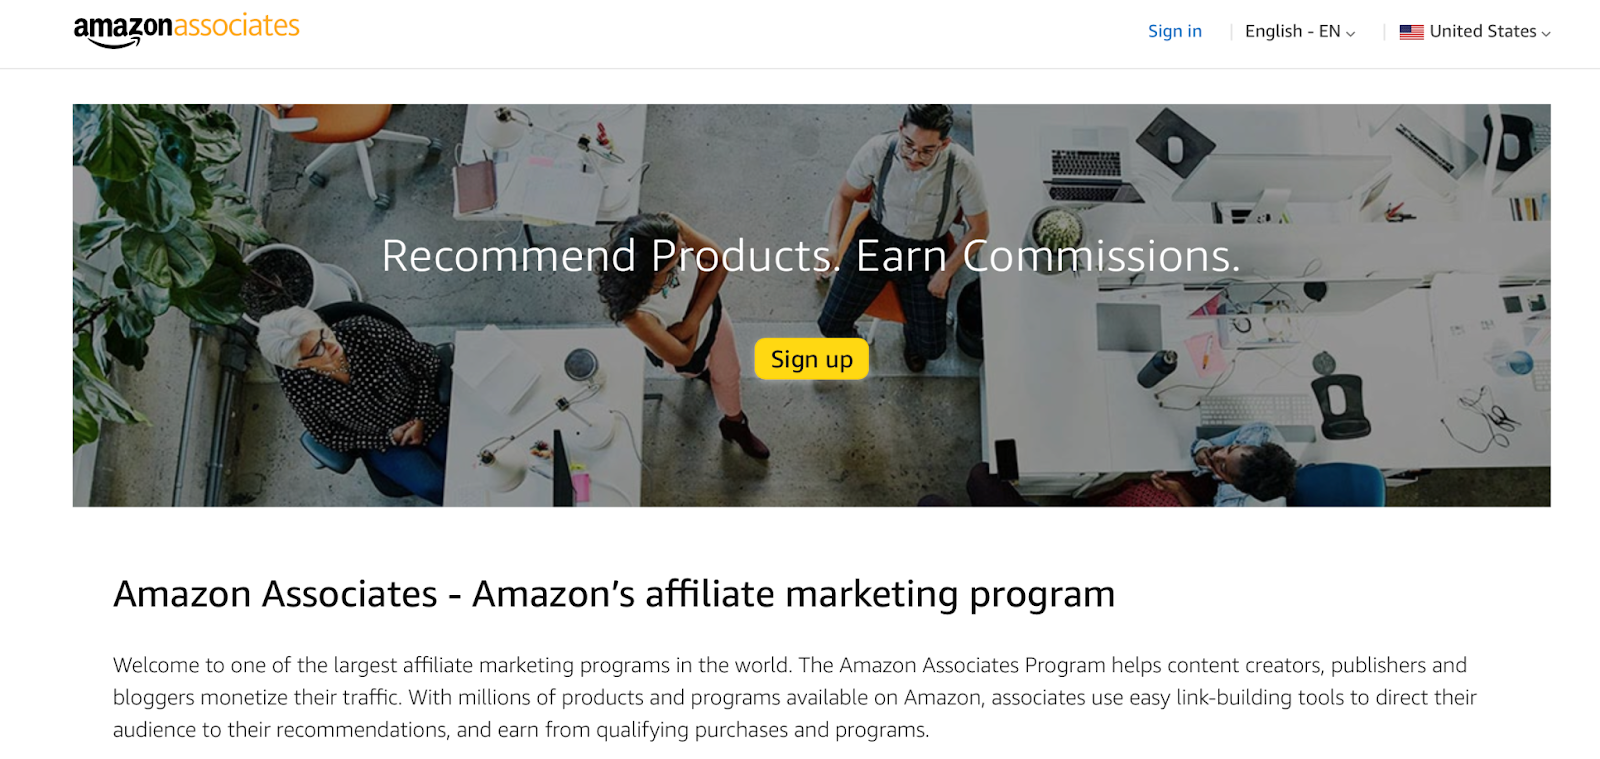 Amazon Associates is a popular affiliate program, enabling you to earn 12% on each sale of your product/service.